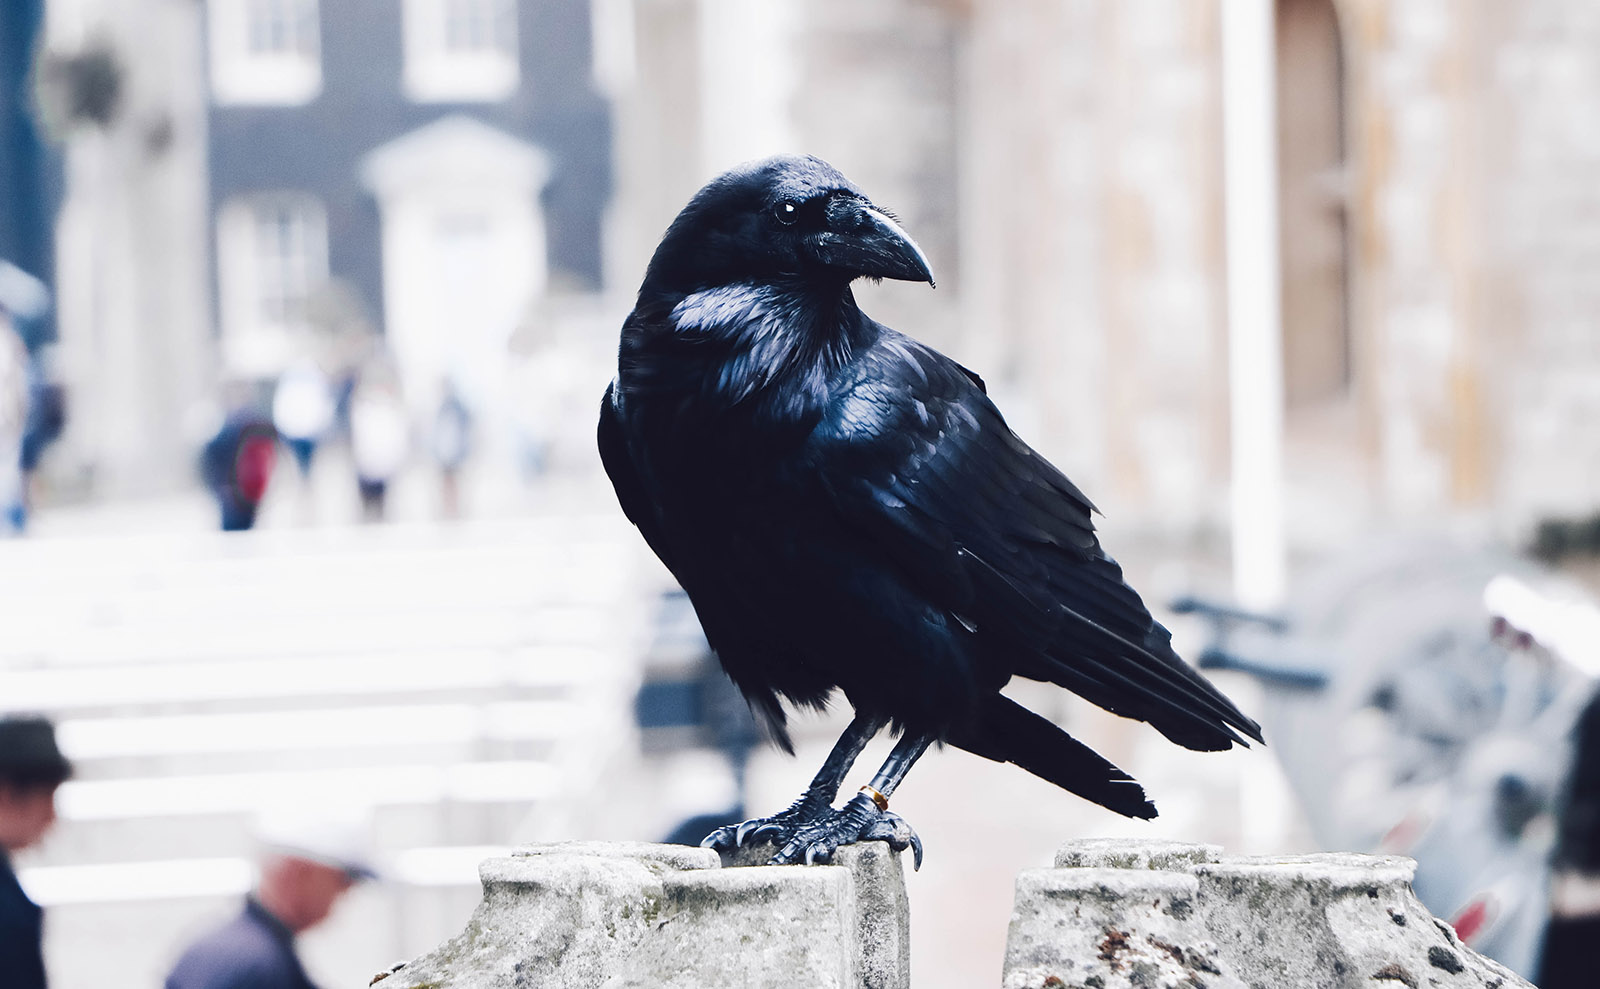 Tower Ravens, Acknowledgements Pages, Forest Sounds, Oxford Comma & More: Endnotes 26 January